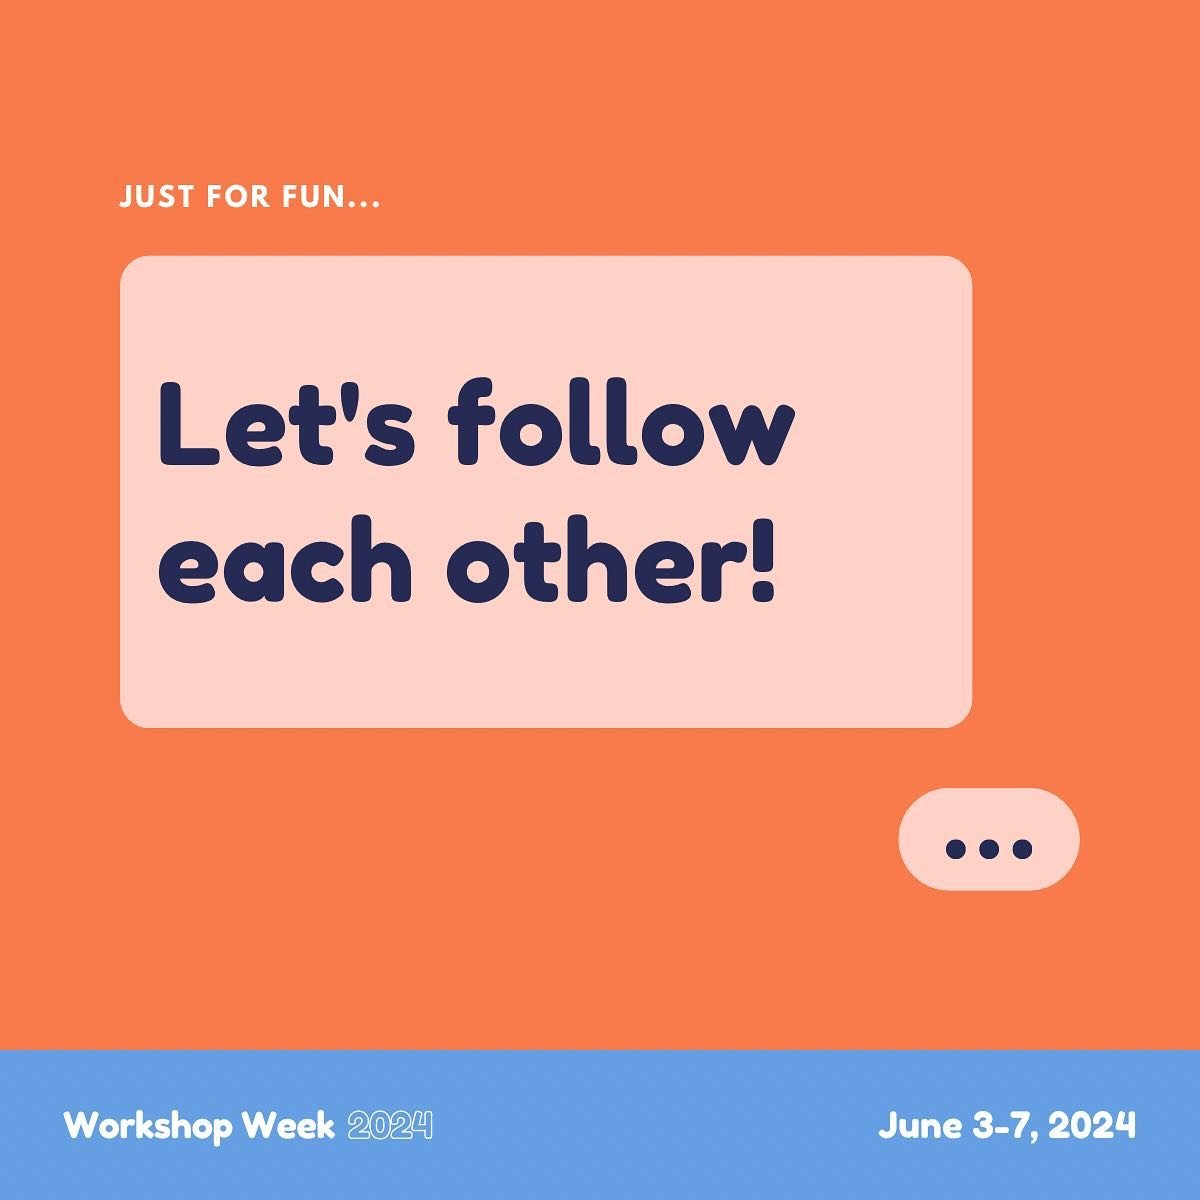 Let&rsquo;s make sure we&rsquo;re following each other so that when Workshop Week starts, we get to see each other&rsquo;s work! 😍

Leave your handle below, then follow at least 3 other people who commented! 😁

*
*
*
*
*
#workshopweek2024 #doodles 